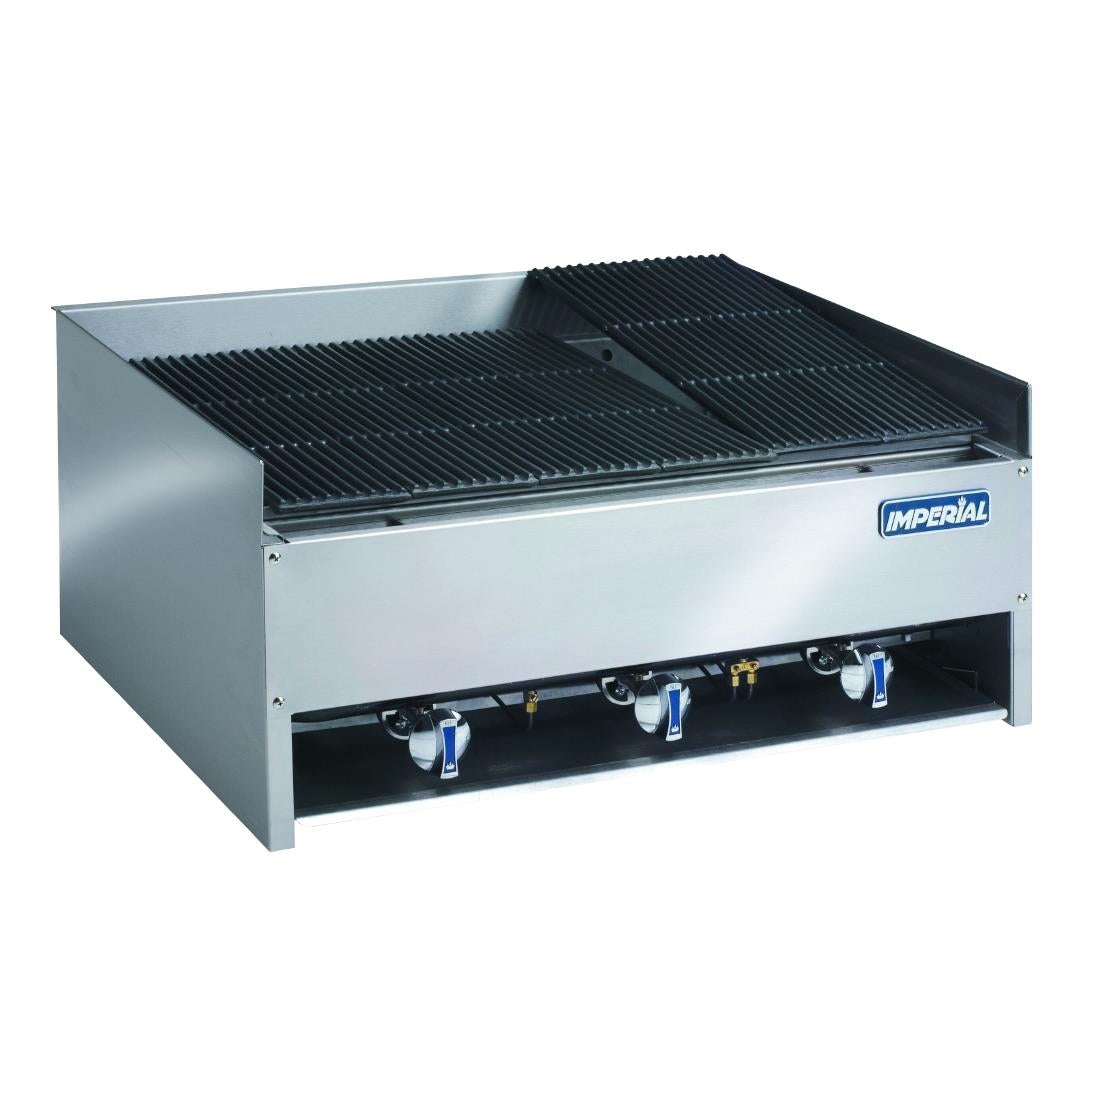 CH503-P Imperial Char Rock Countertop Chargrill EBA-3223 LPG JD Catering Equipment Solutions Ltd